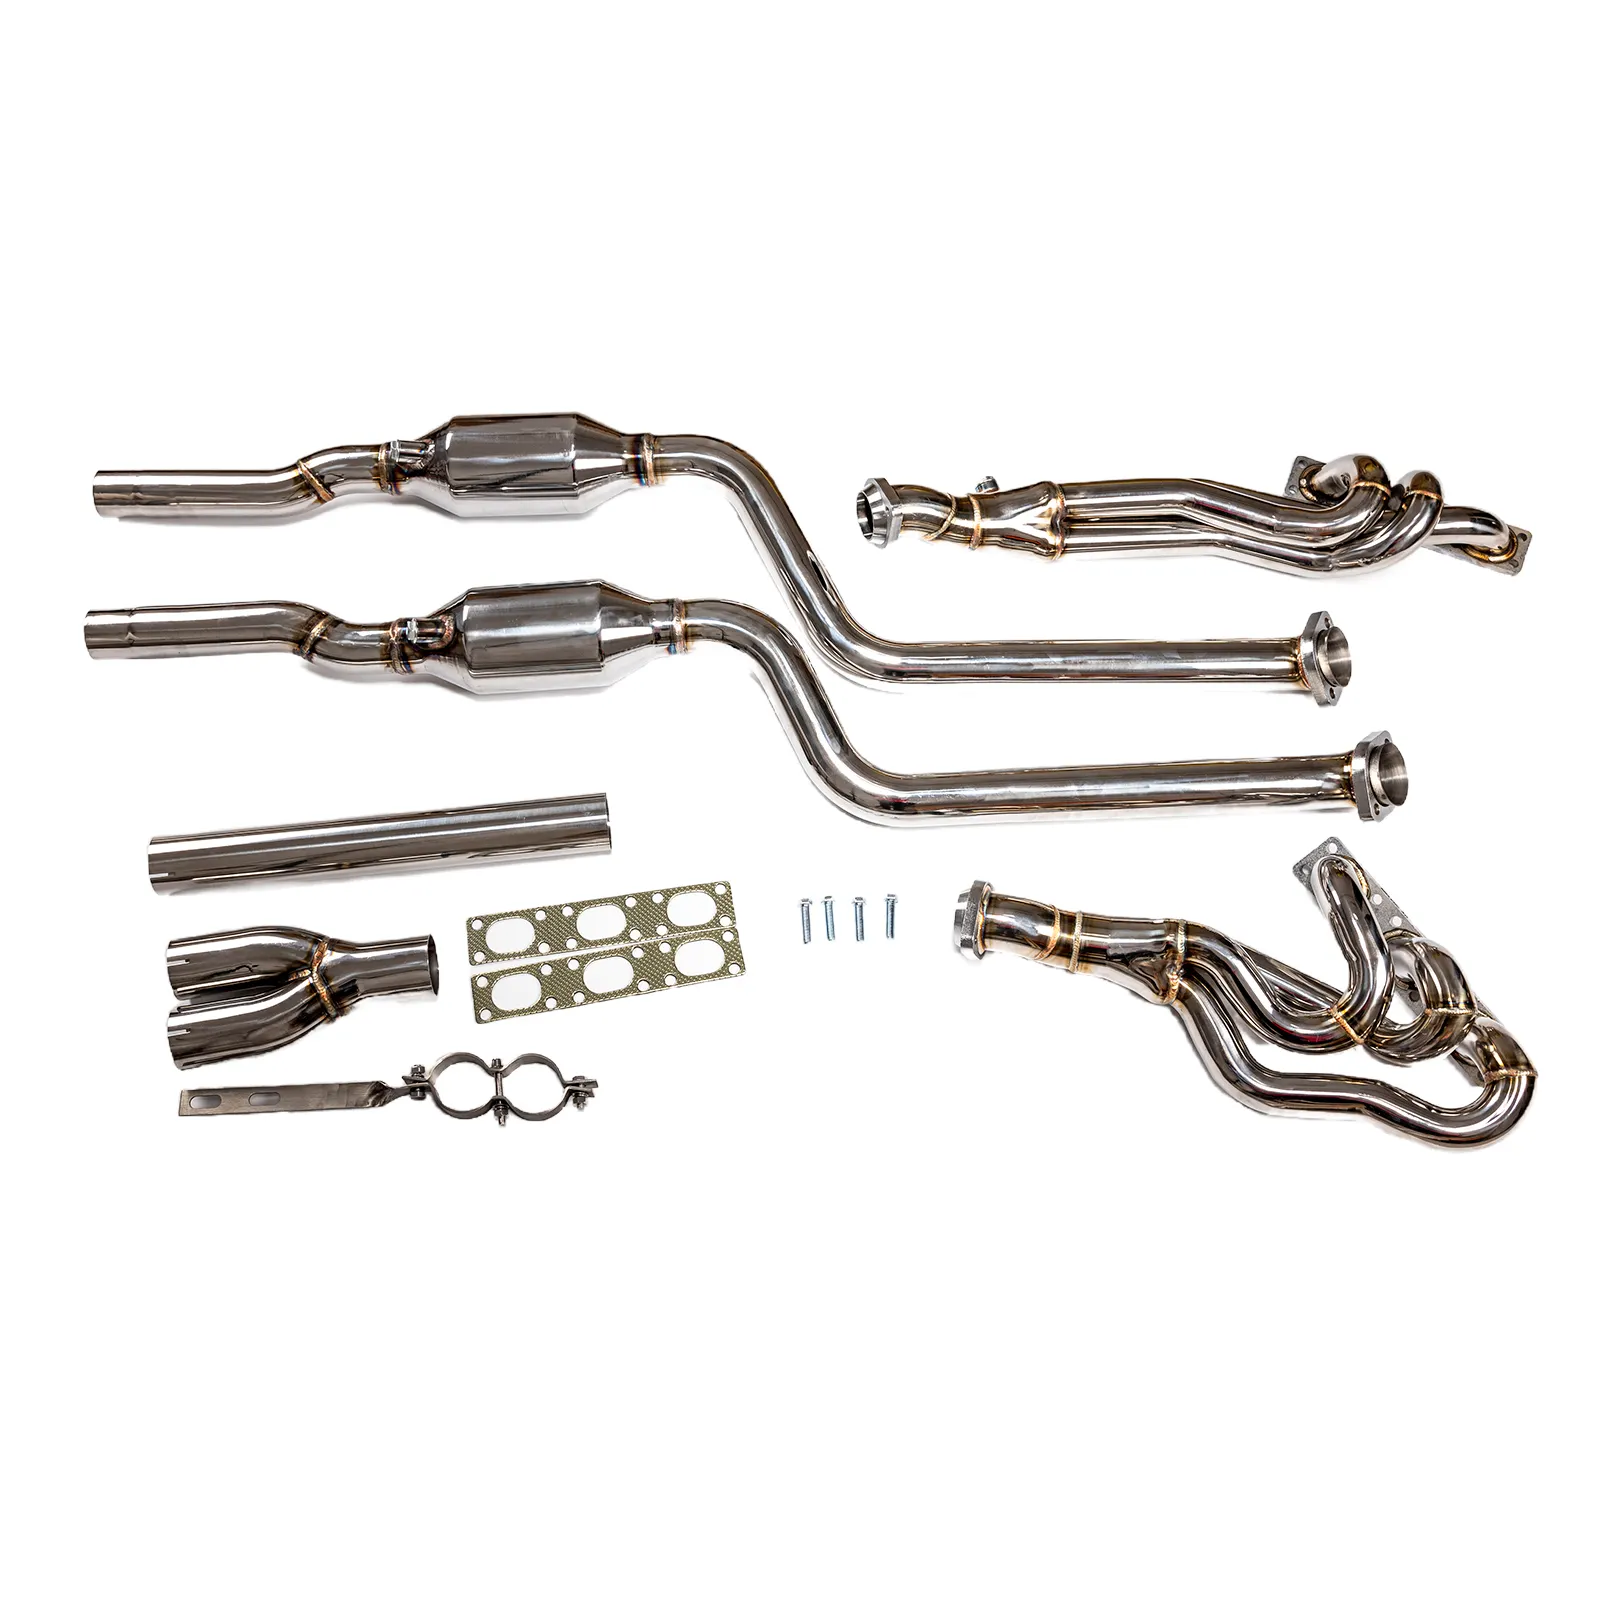 High Quality Polished Stainless Steel Exhaust System Manifold Header for BMW M52/M54 Engines